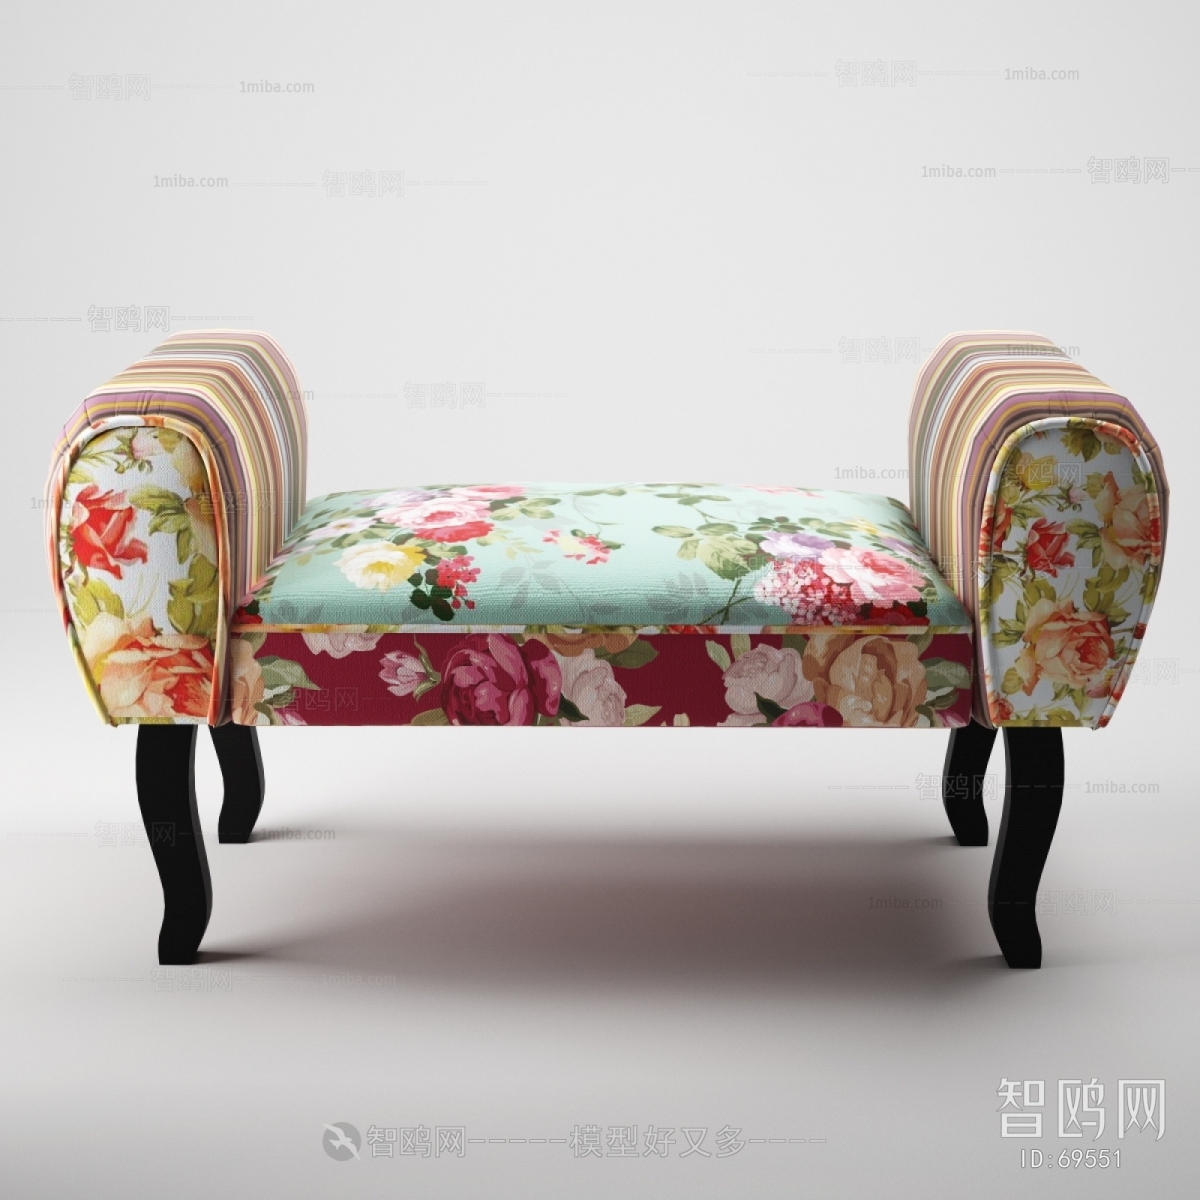 New Classical Style Footstool